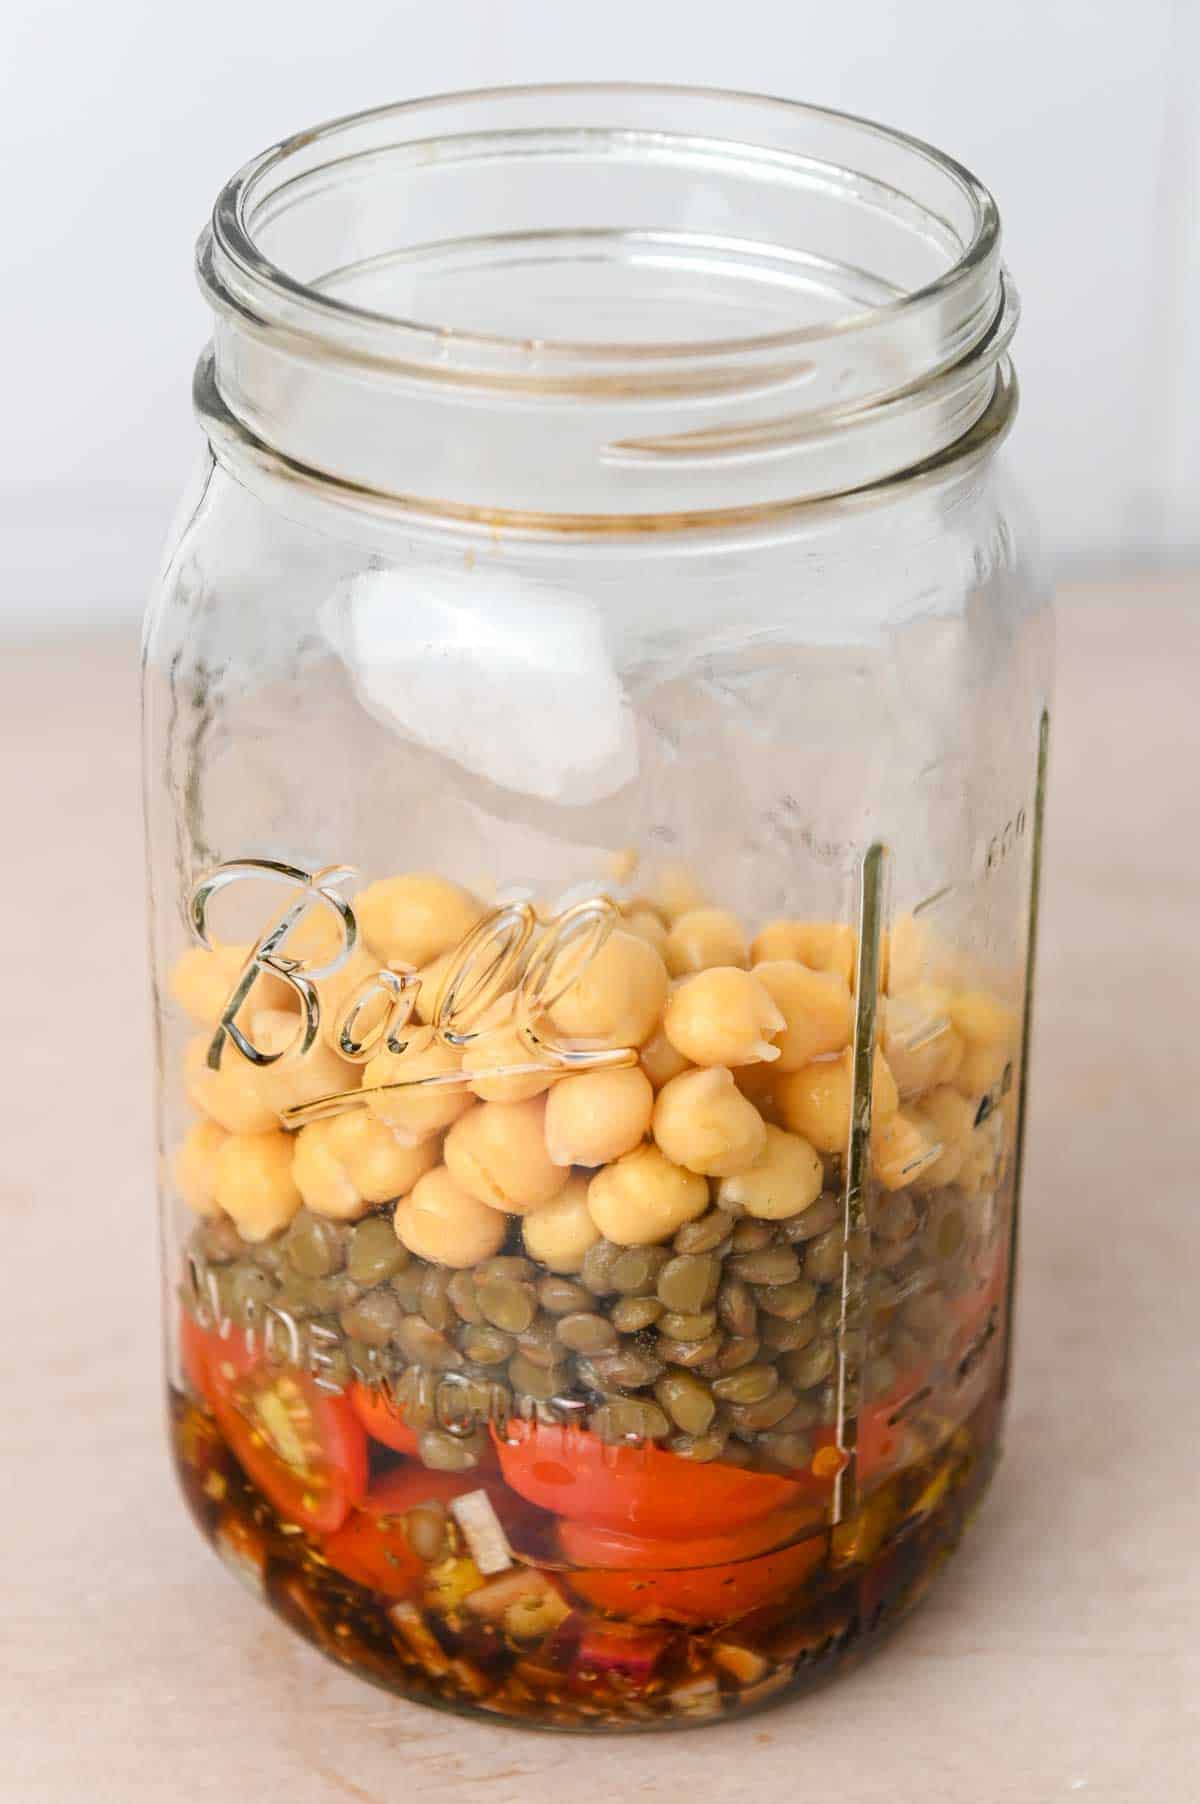 Glass mason jar filled with vinaigrette, tomatoes, onions, lentils, and chickpeas.